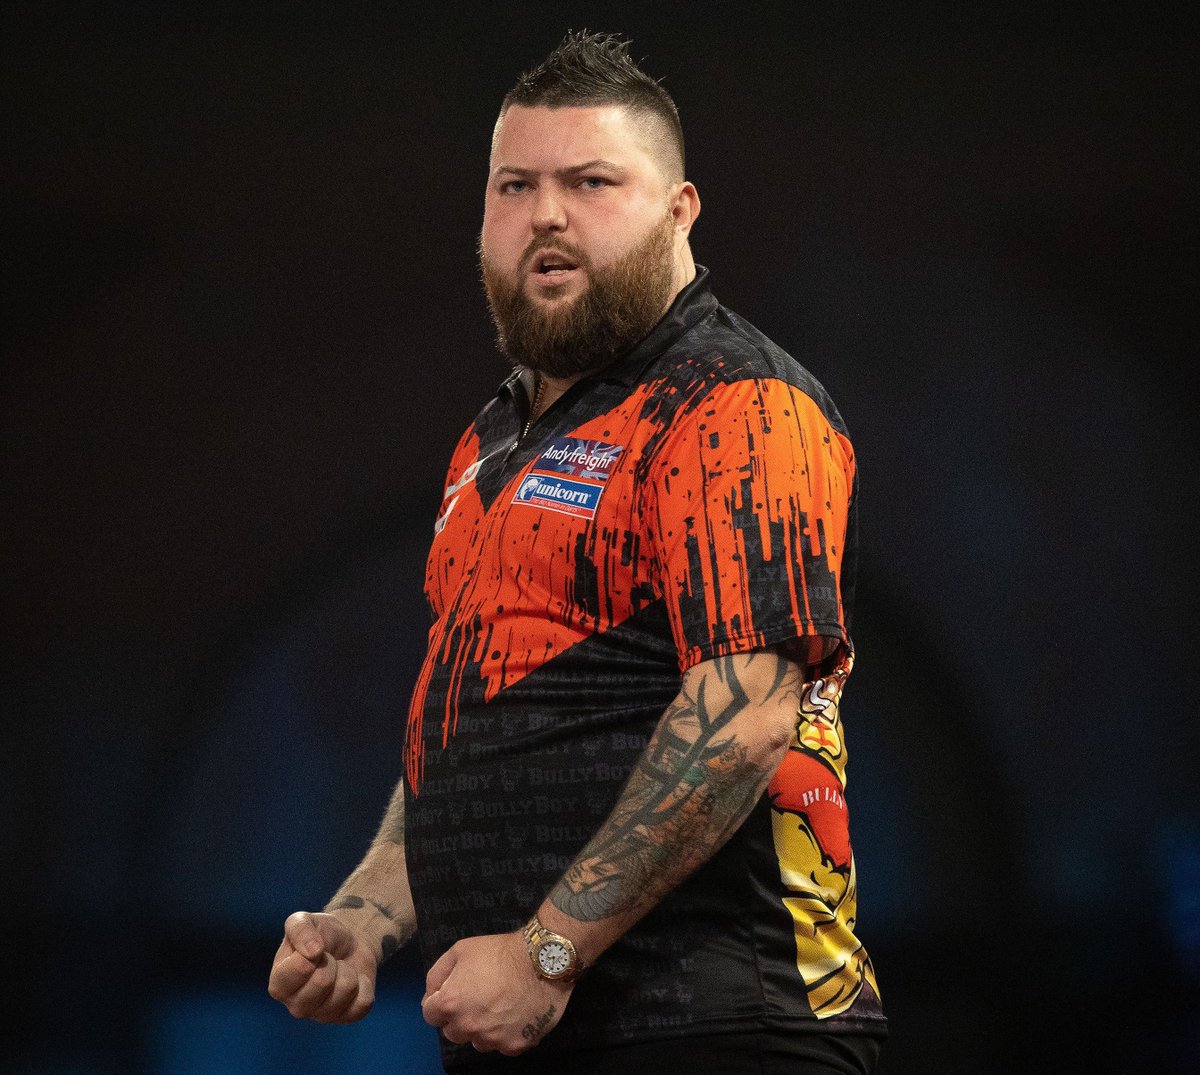 🏆 BULLY BOY WINS IN GERMANY

Michael Smith wins his first title in nearly a year after beating Ryan Joyce 8-6 in Hildesheim

The former World Champion had been battling gout throughout the day but still managed a string of impressive performances to secure the title!

Well done!